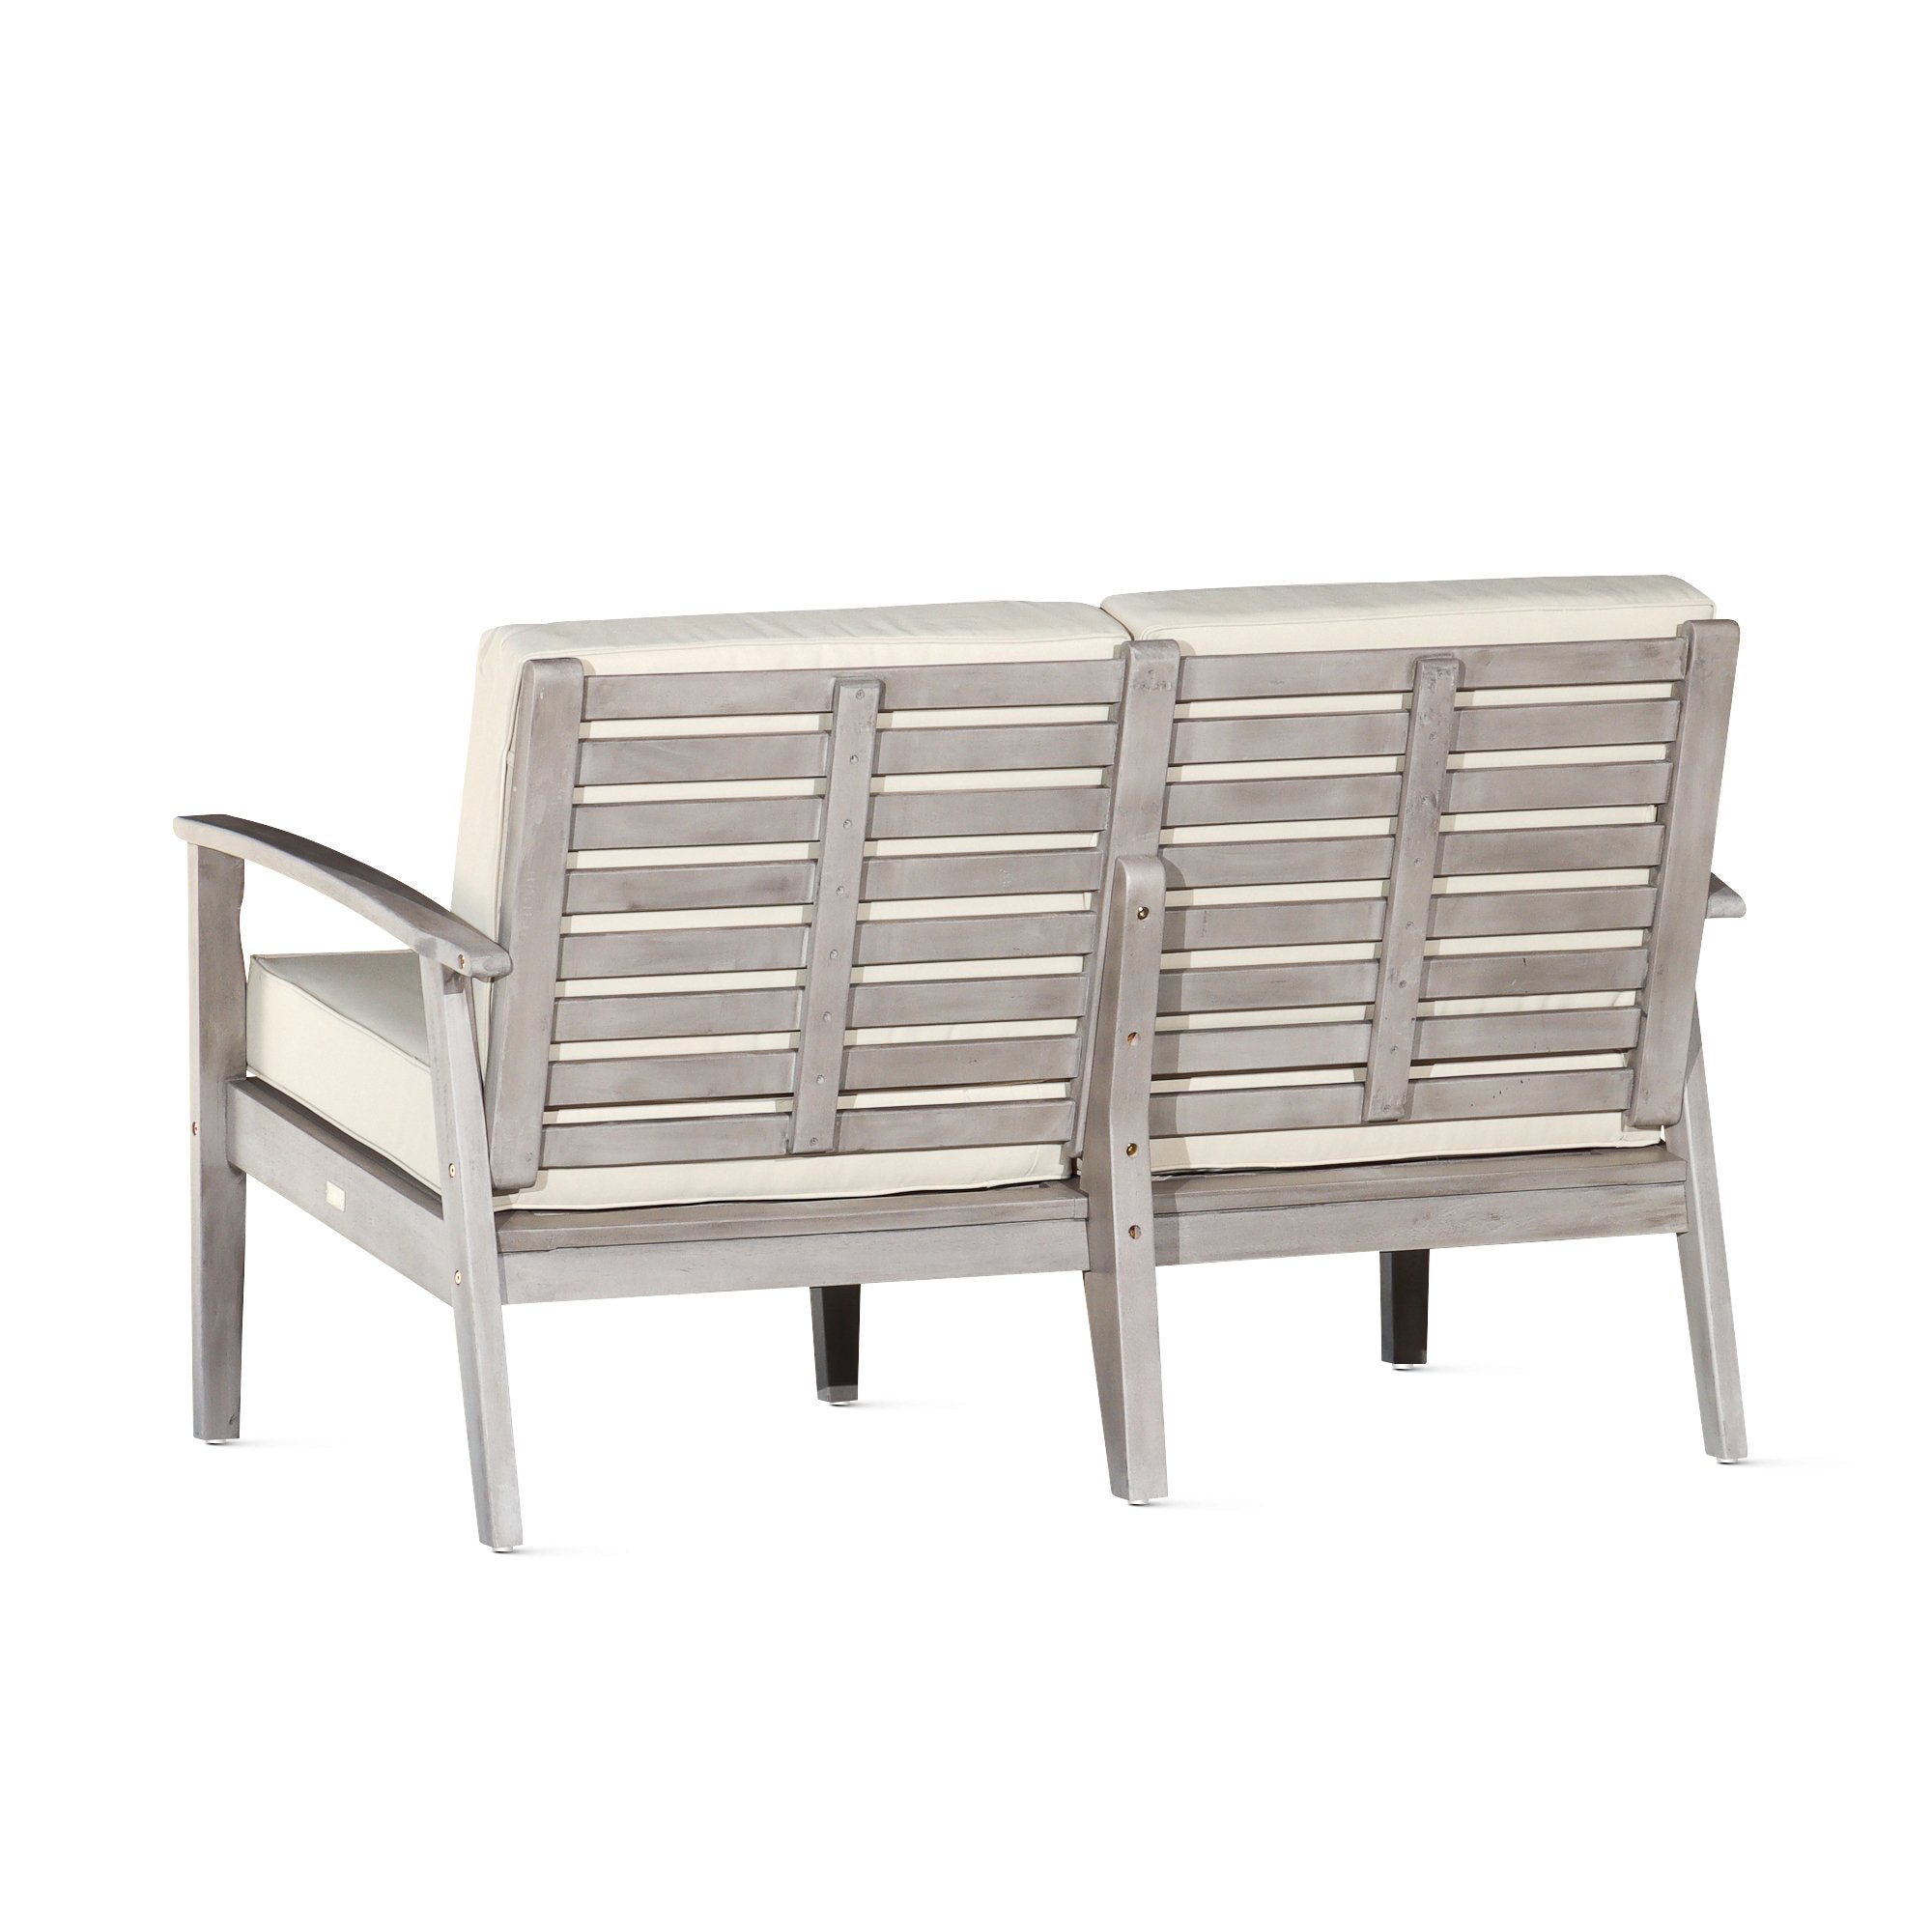 Outdoor Loveseat with Cushions, Driftwood Gray Finish, Sage Cushions - Tuesday Morning-Chairs & Seating